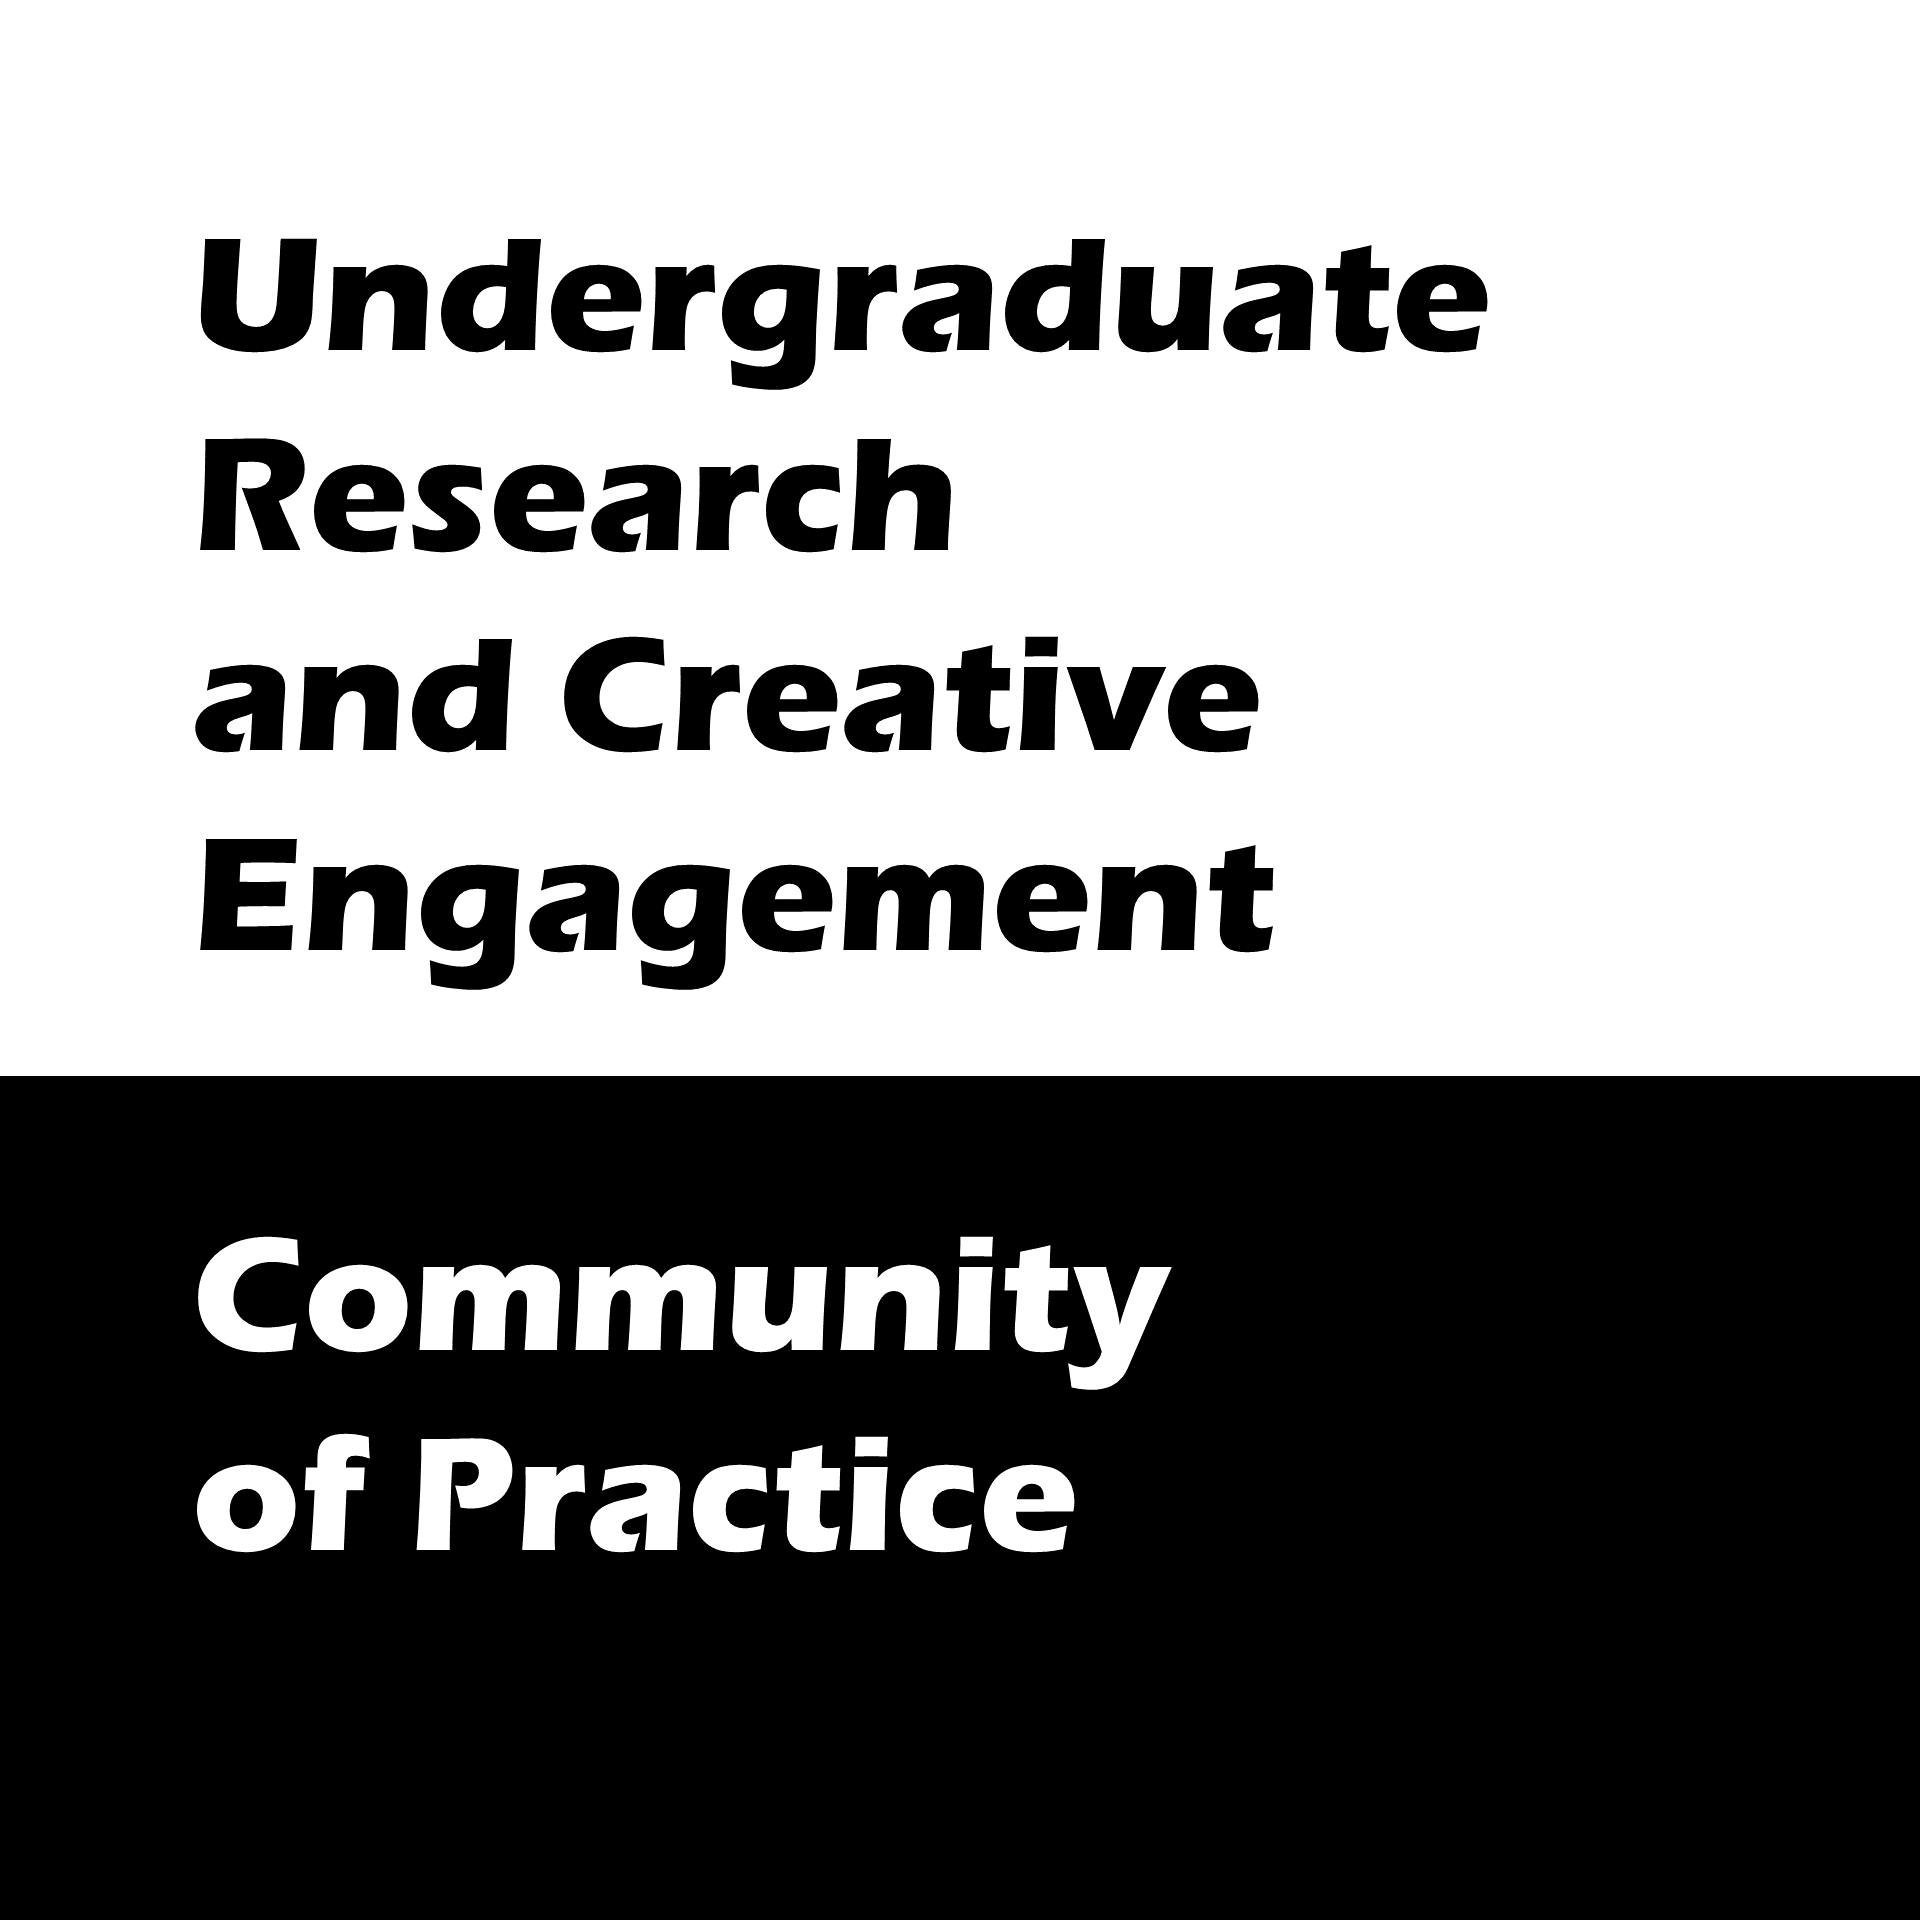 Undergraduate Research and Creative Engagement Community of Practice